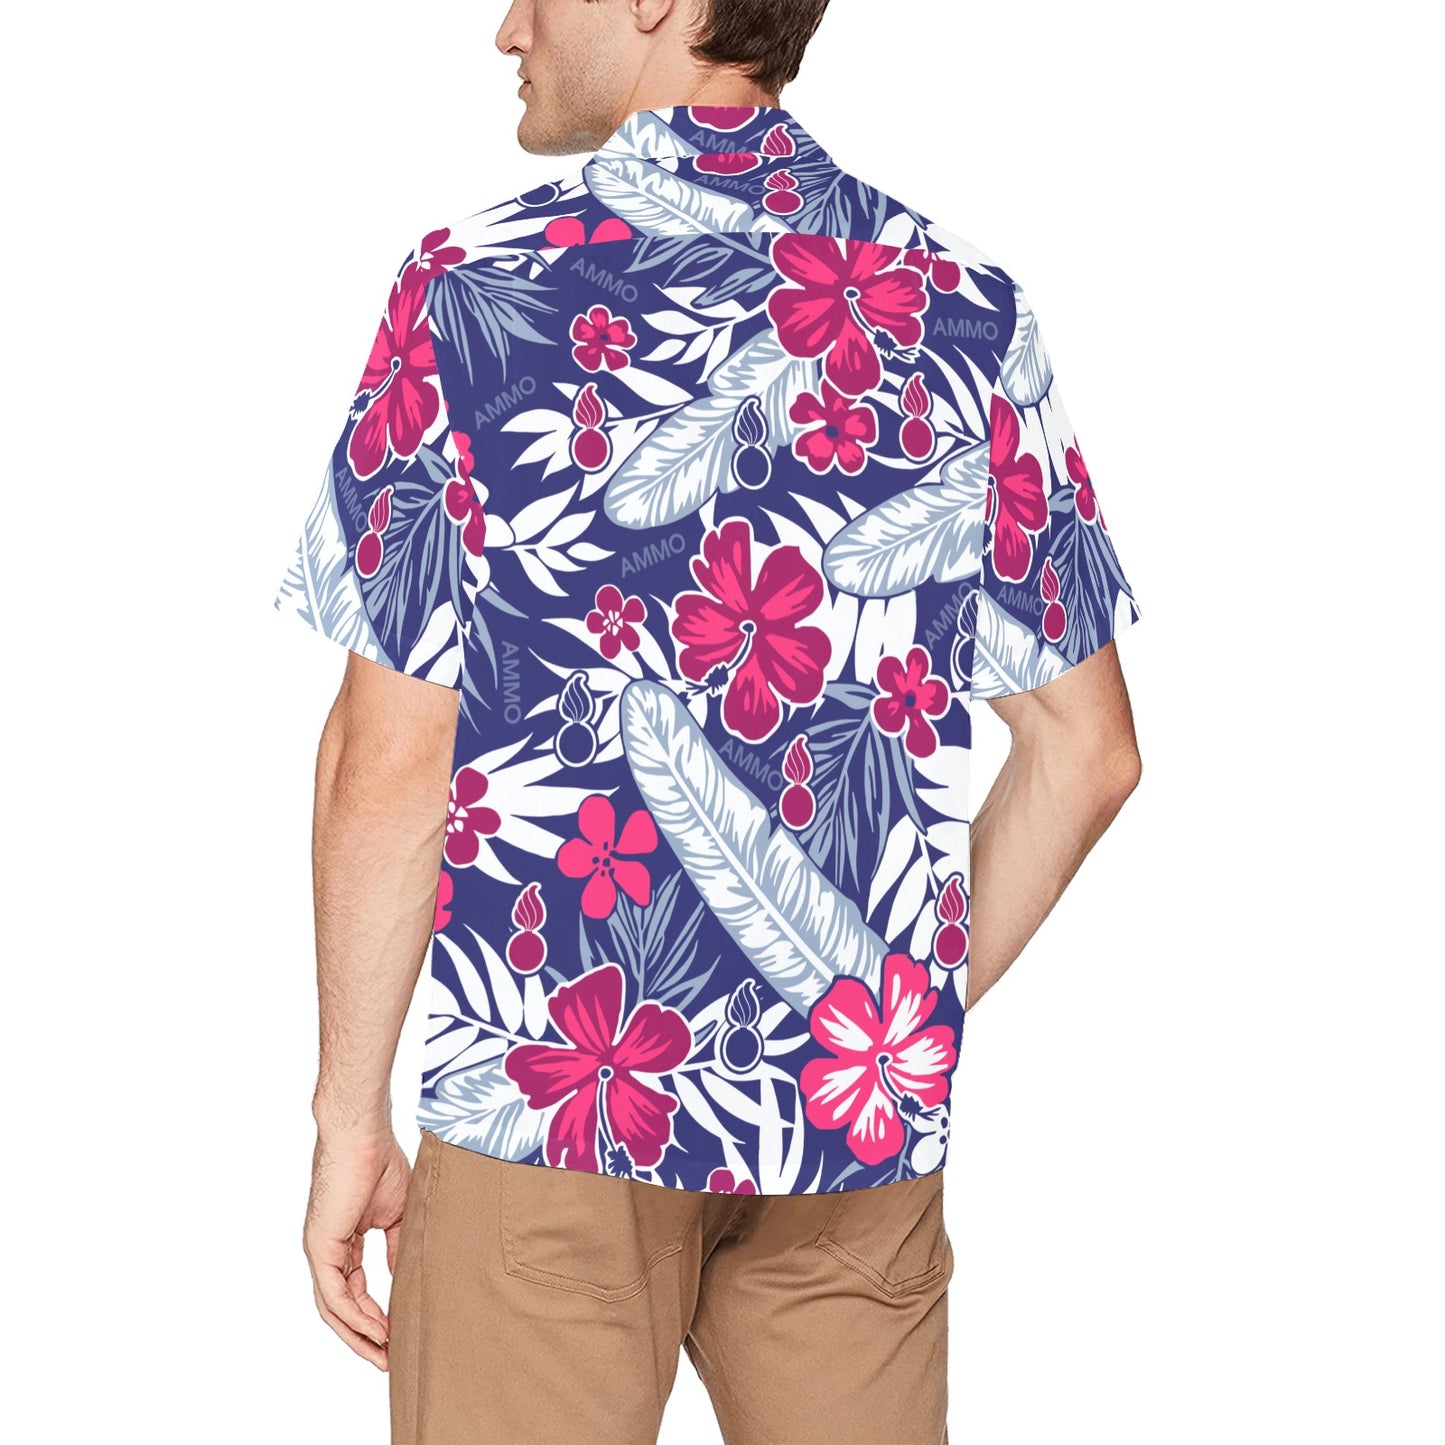 Blue Red White Pink and Grey AMMO Mens All Over Print Hawaiian Shirt With Left Chest Pocket